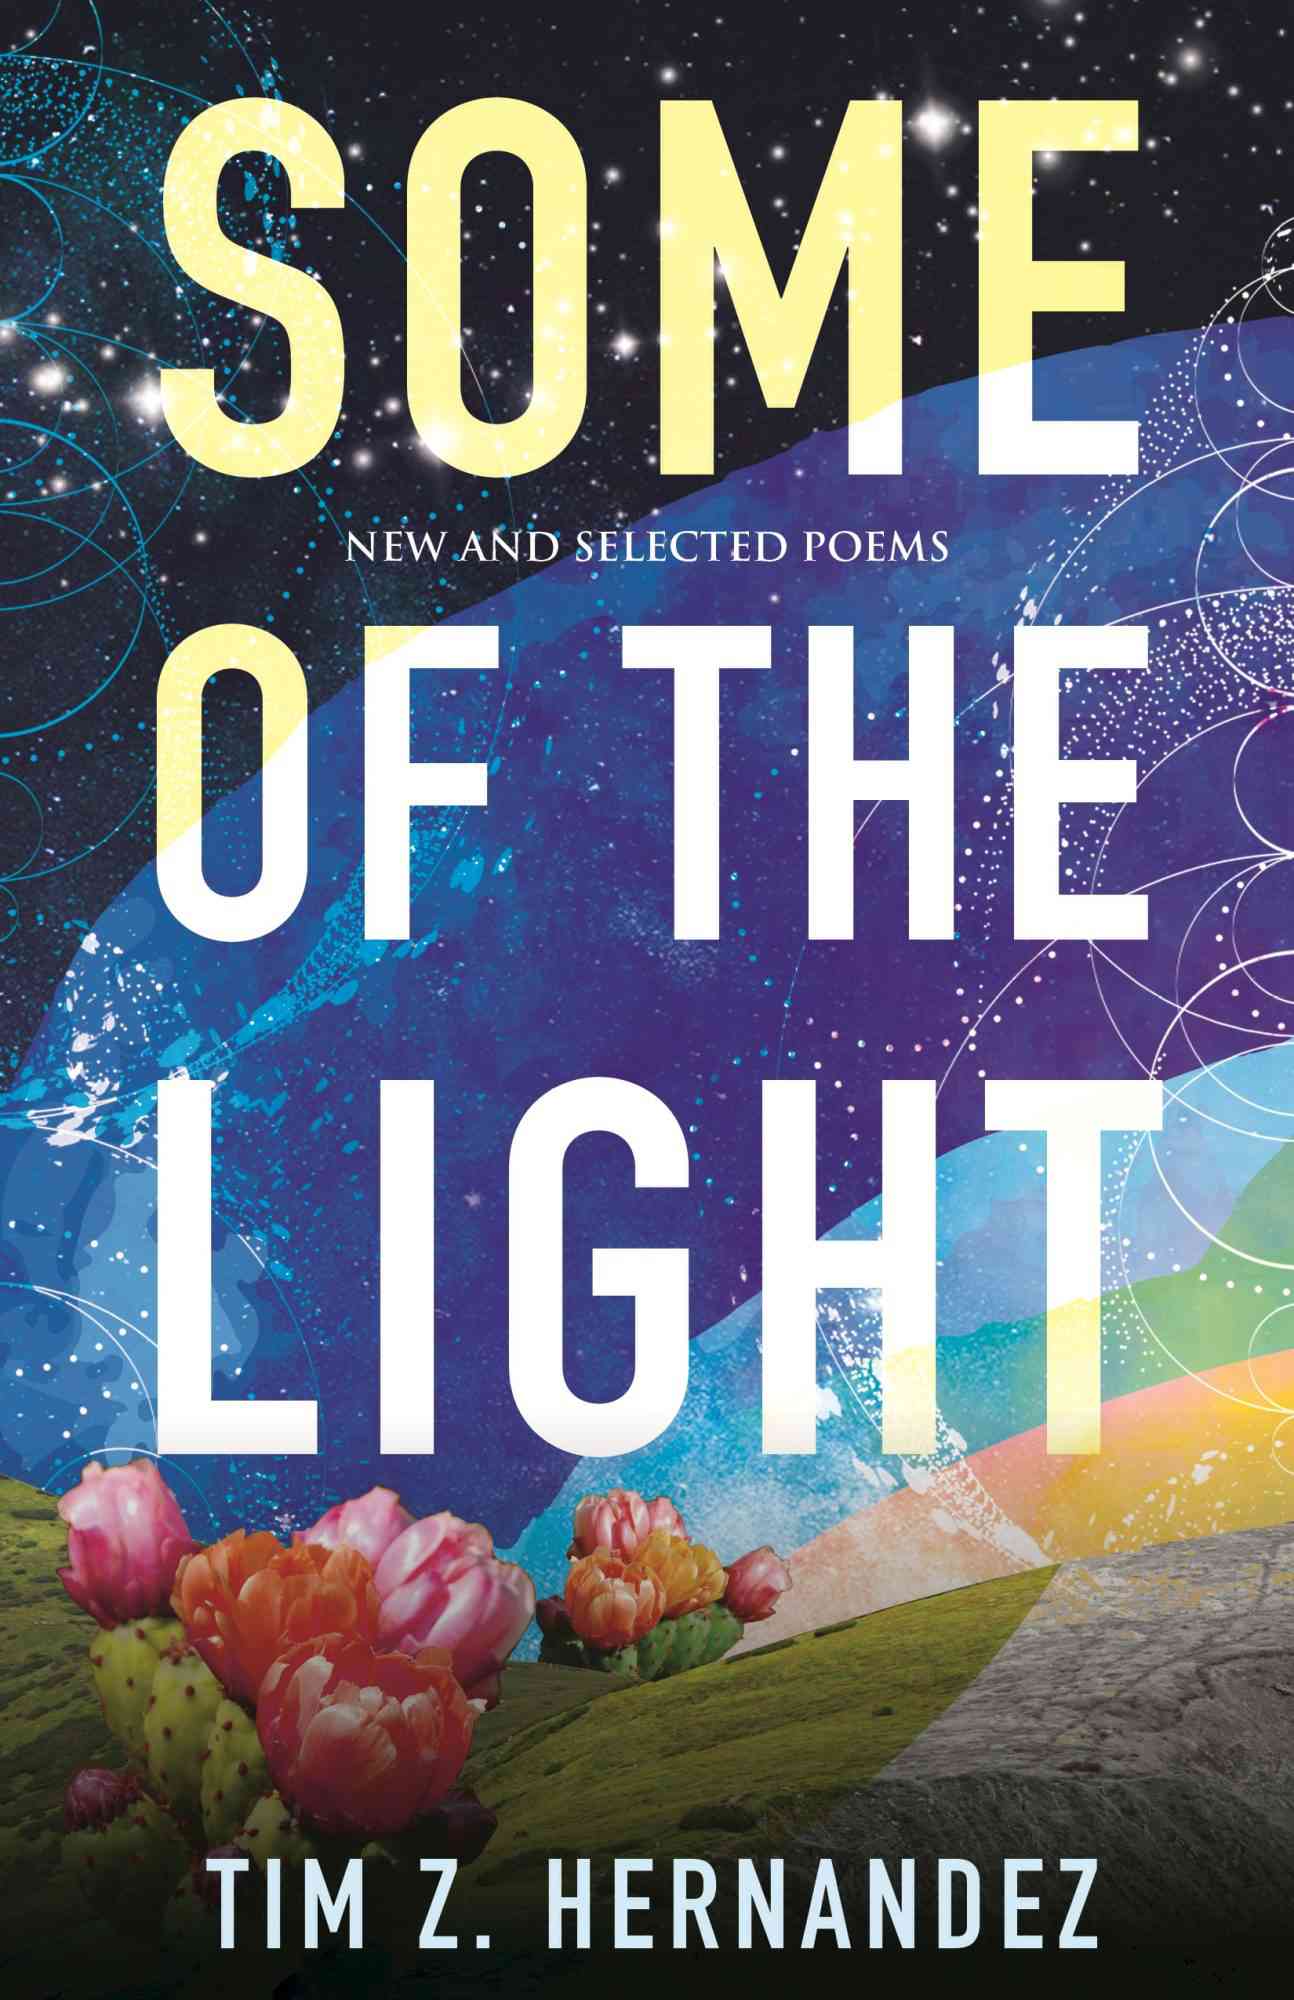 Tim Hernandez's "Some of the Light" cover